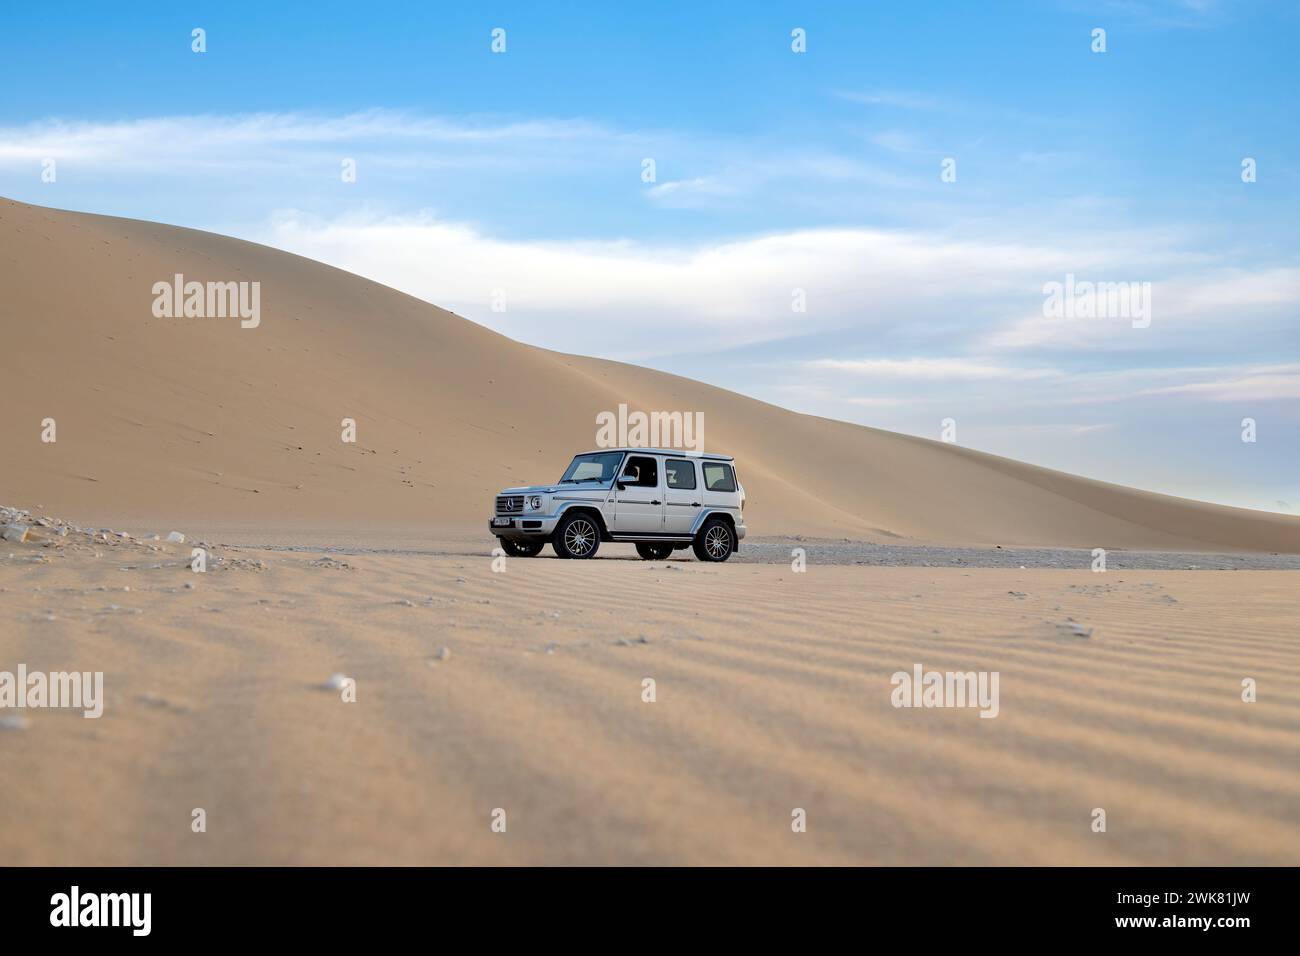 Mercedes G500 Silver Color Dune Bashing Stock Photo